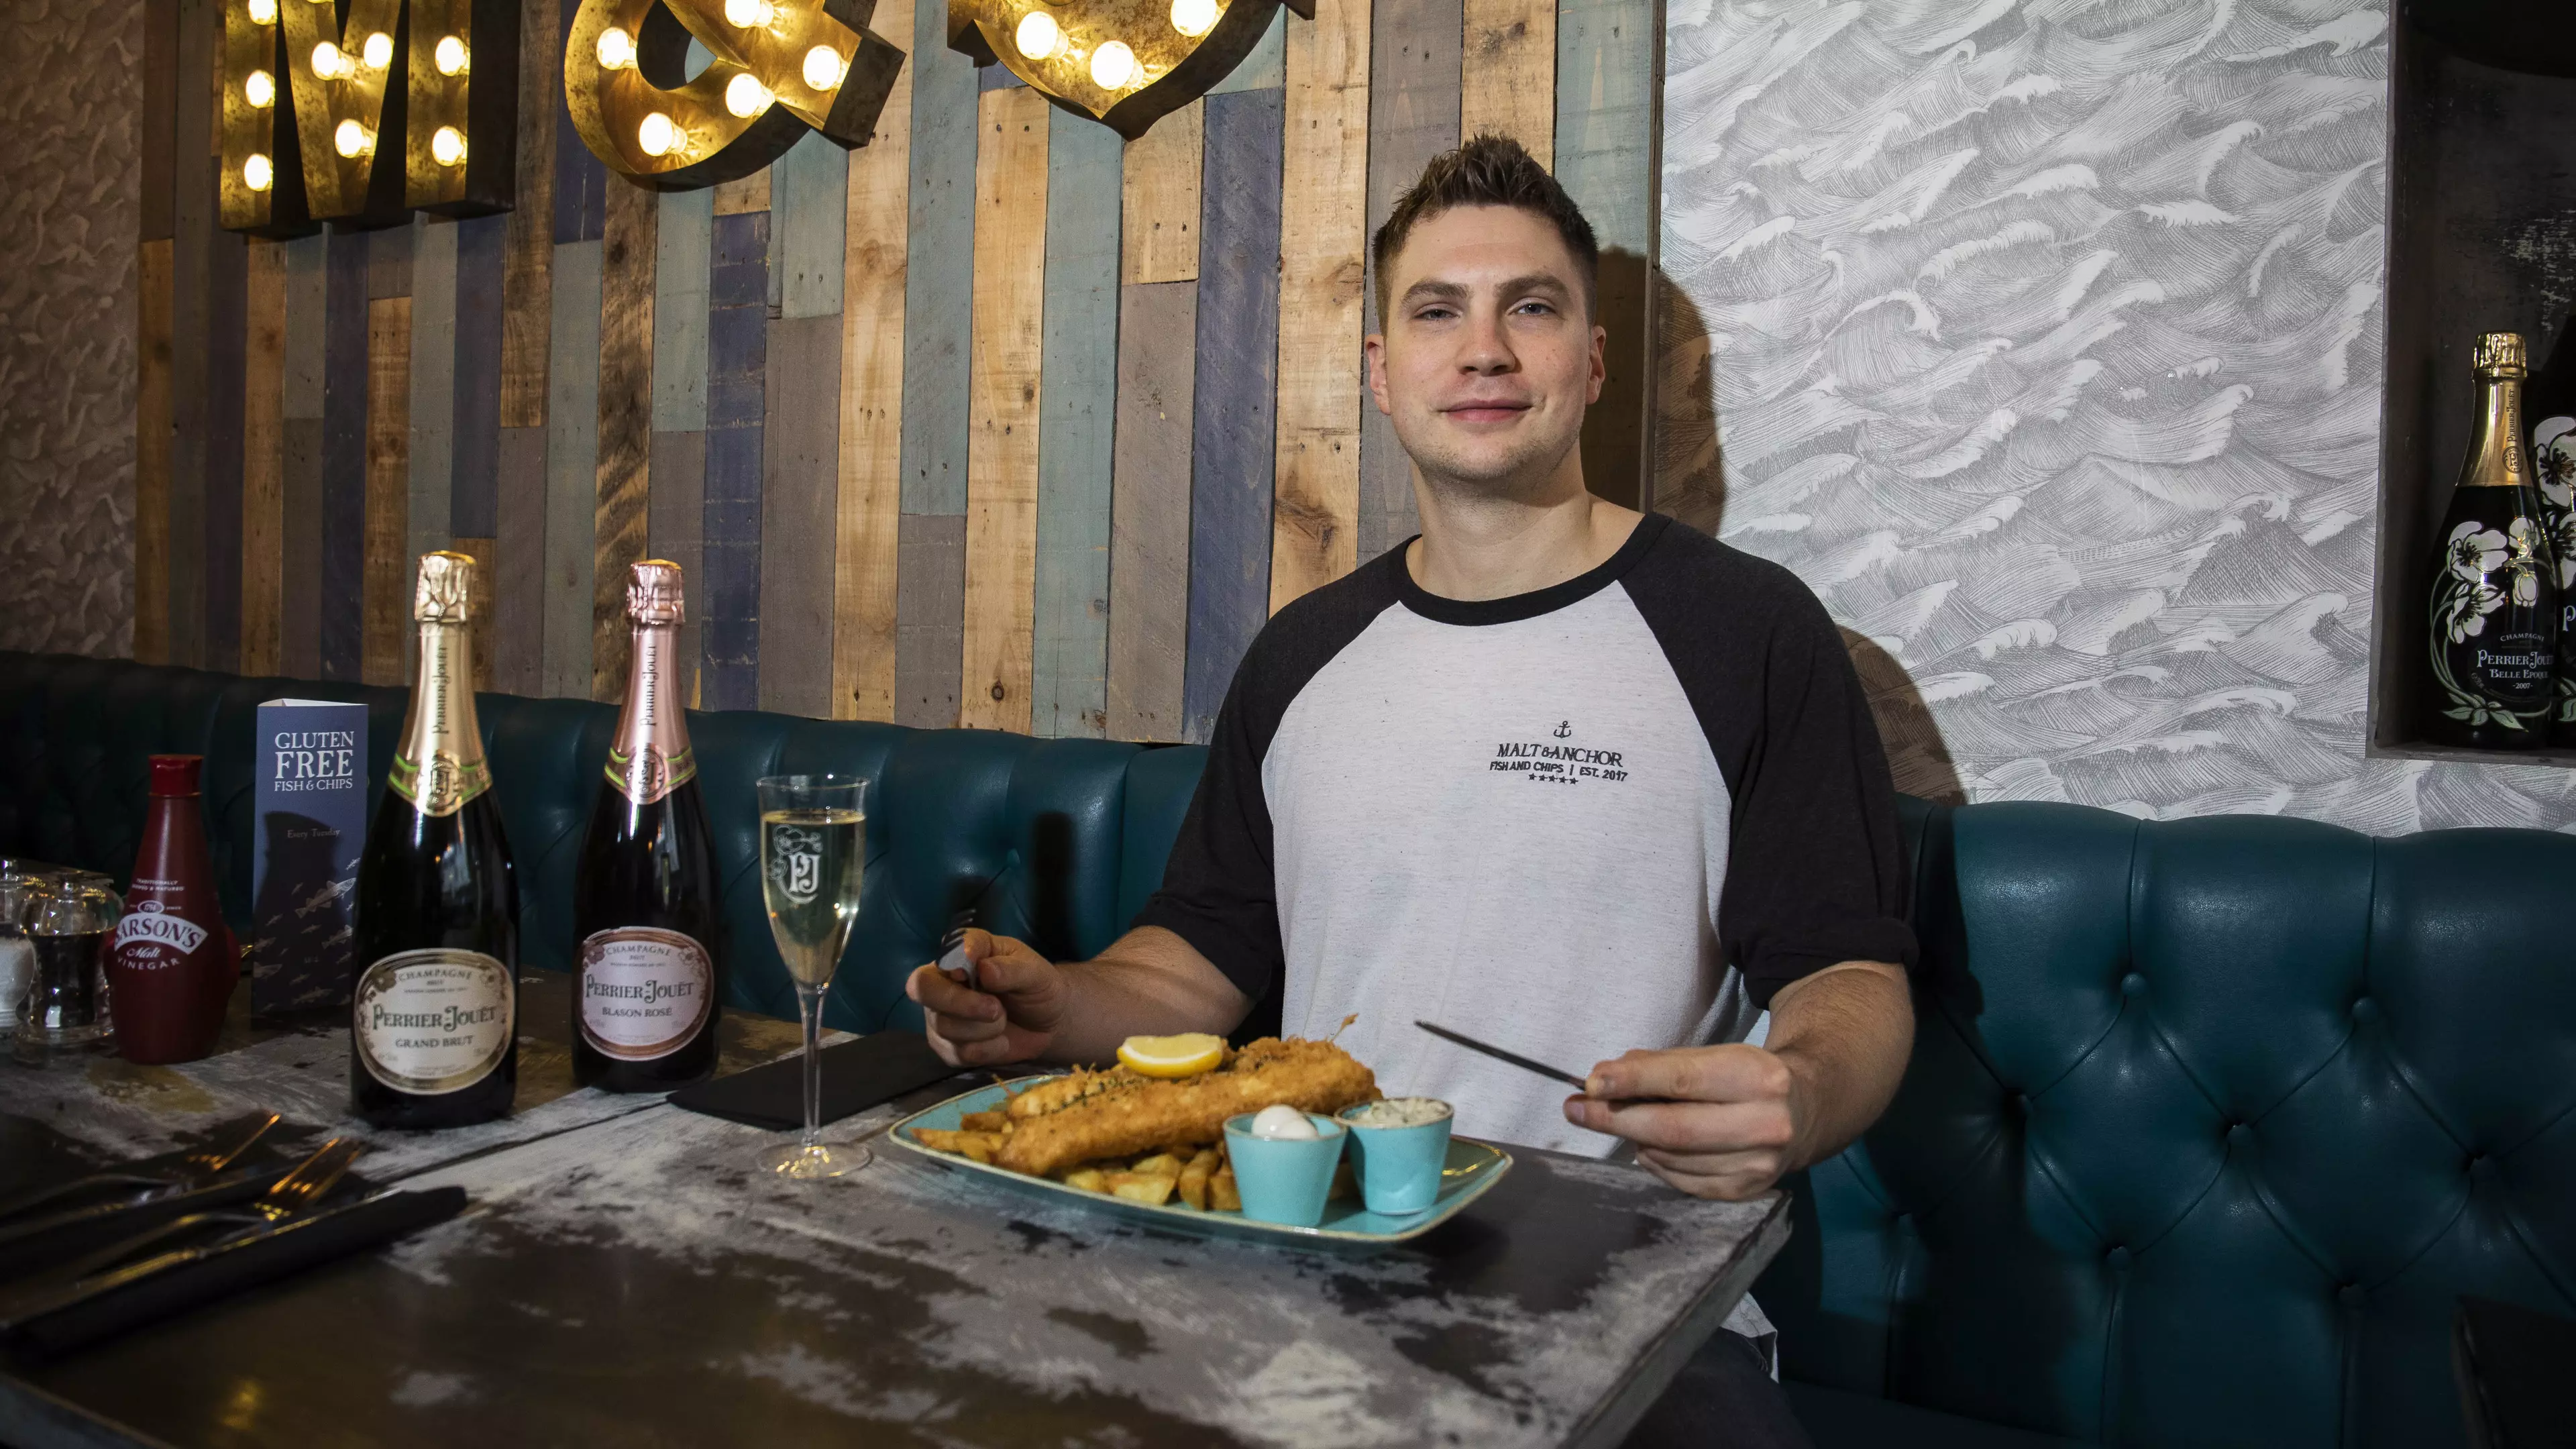 This Fish And Chip Shop Lets You Drink Prosecco With Your Battered Cod